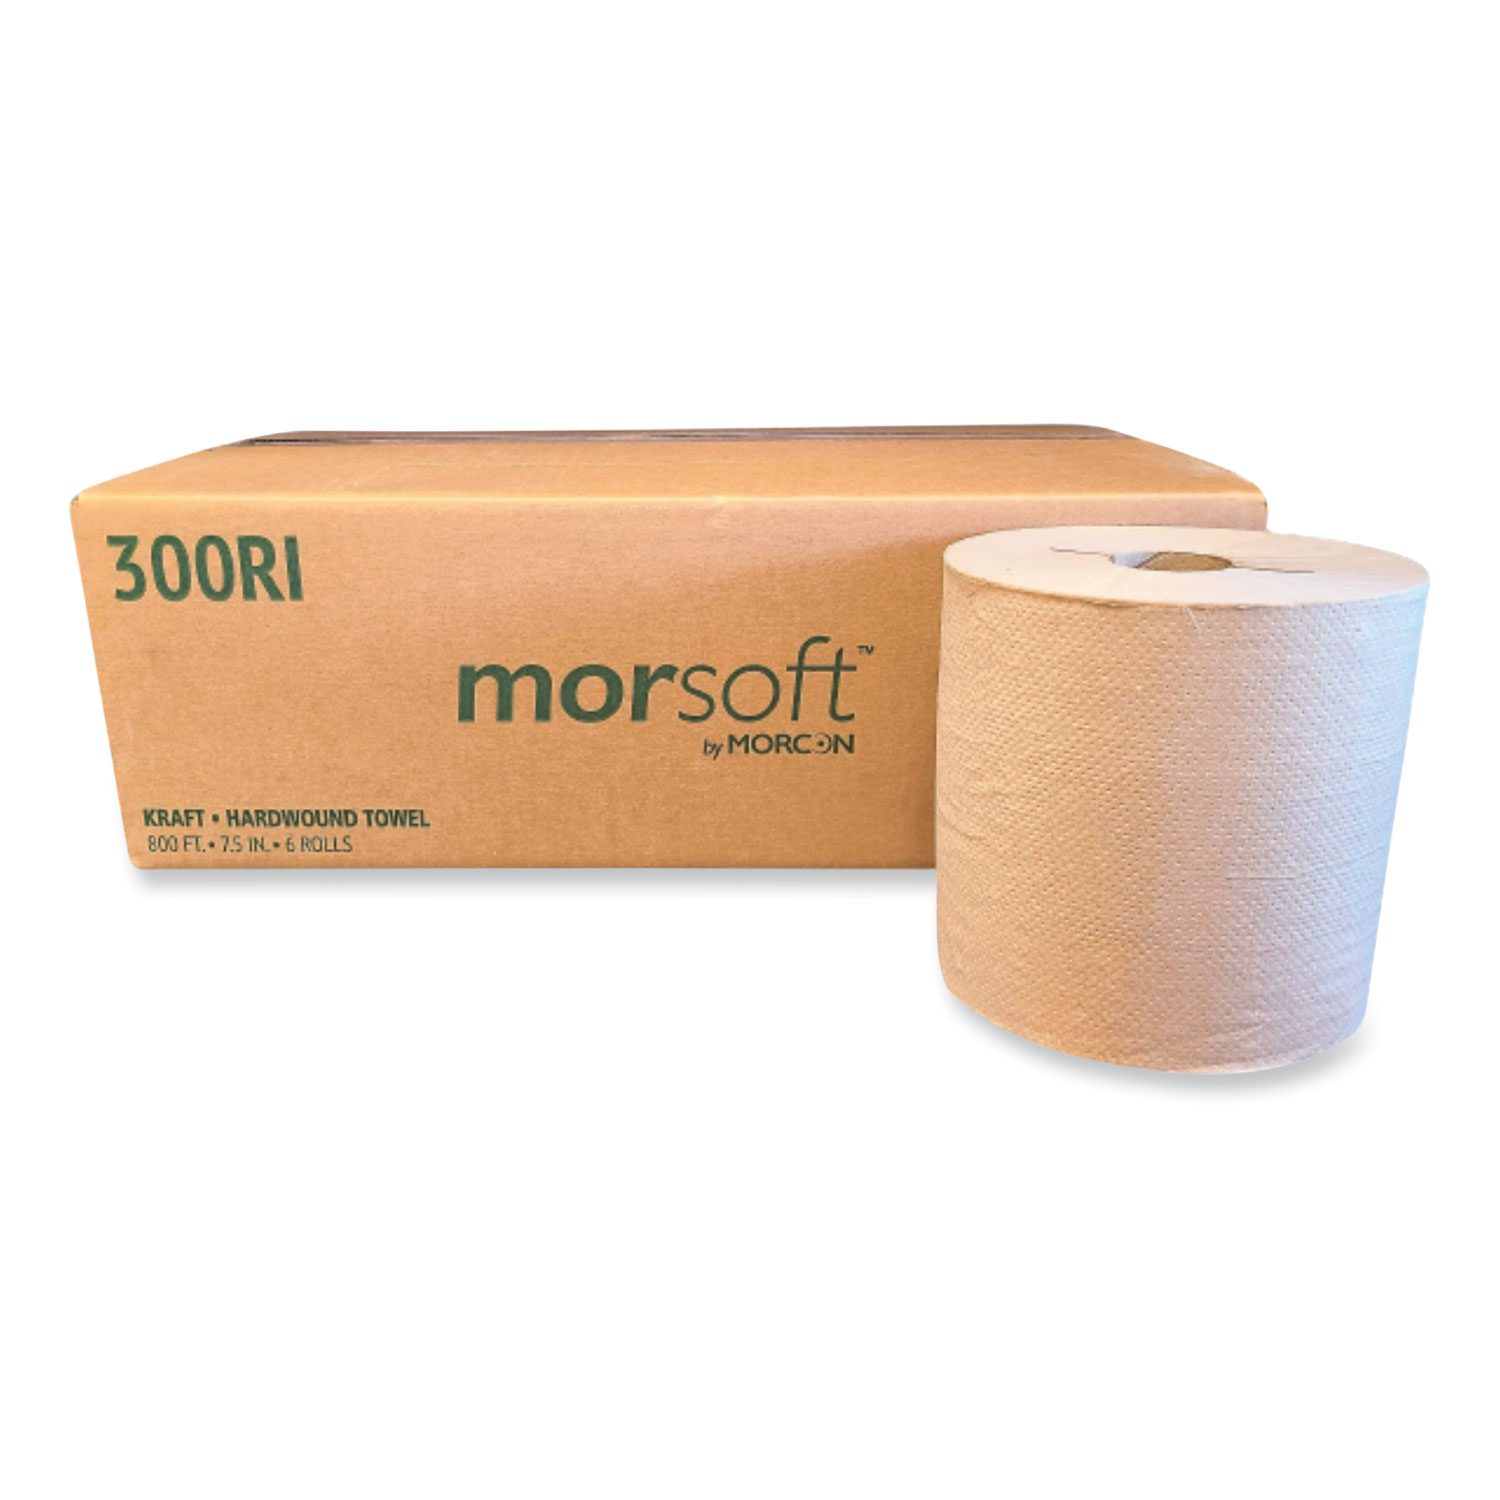 Morcon Tissue Morsoft Controlled Towels, I-Notch, 7.5